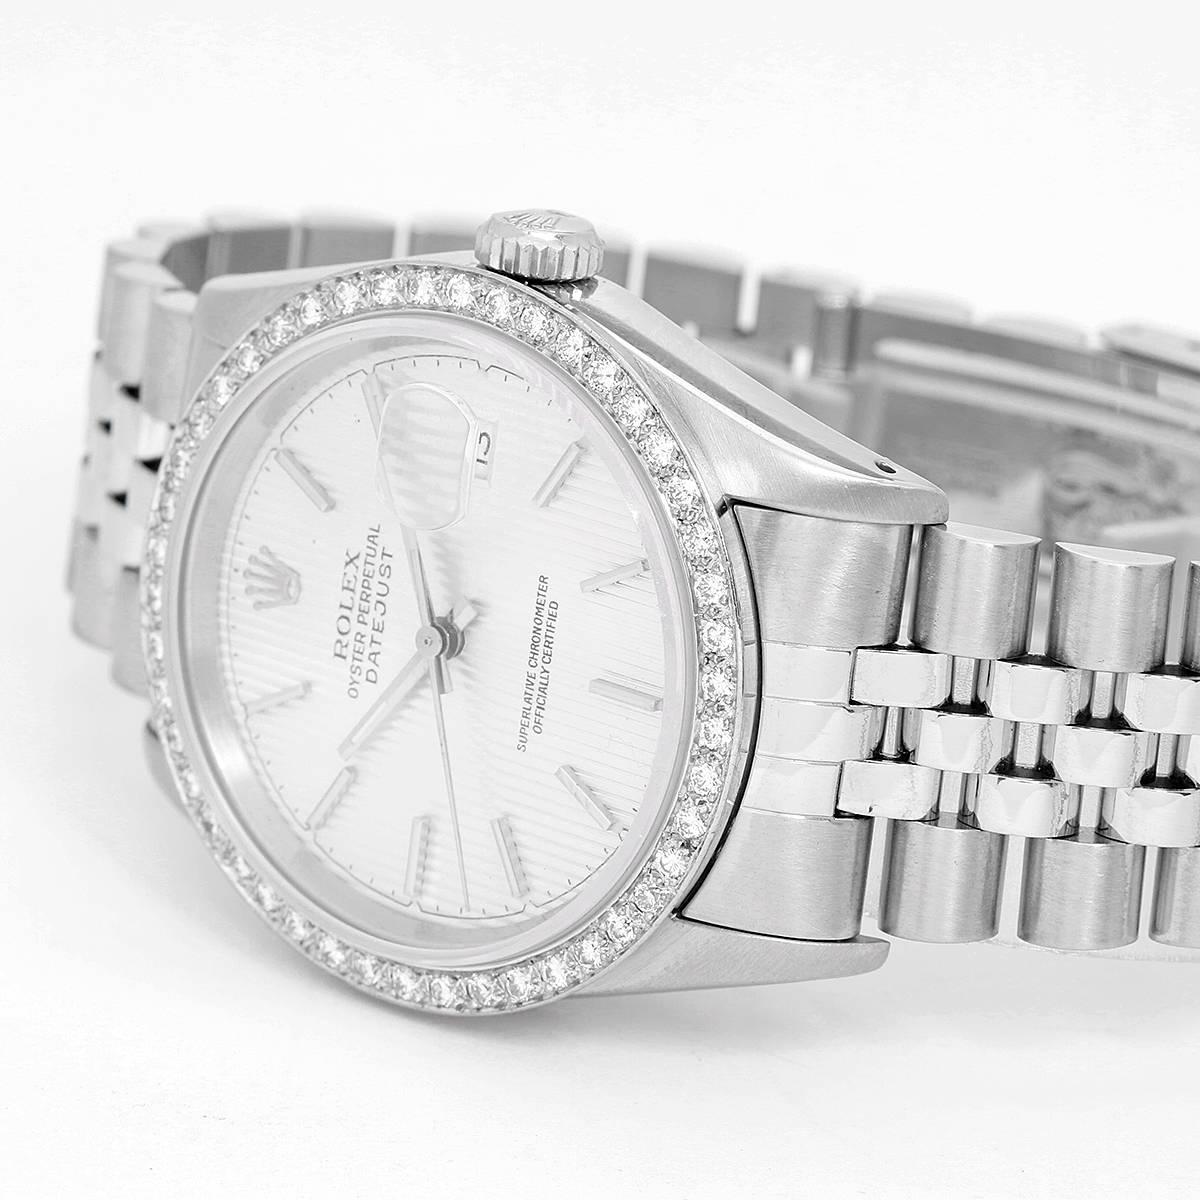 Rolex Datejust Stainless Steel 16220 Mens Watch -  Automatic Winding. Stainless Steel case with custom diamond bezel (35mm ). Silvered Tapestry Dial with raised hour markers. Stainless Steel Jubilee bracelet. Pre-owned with box.